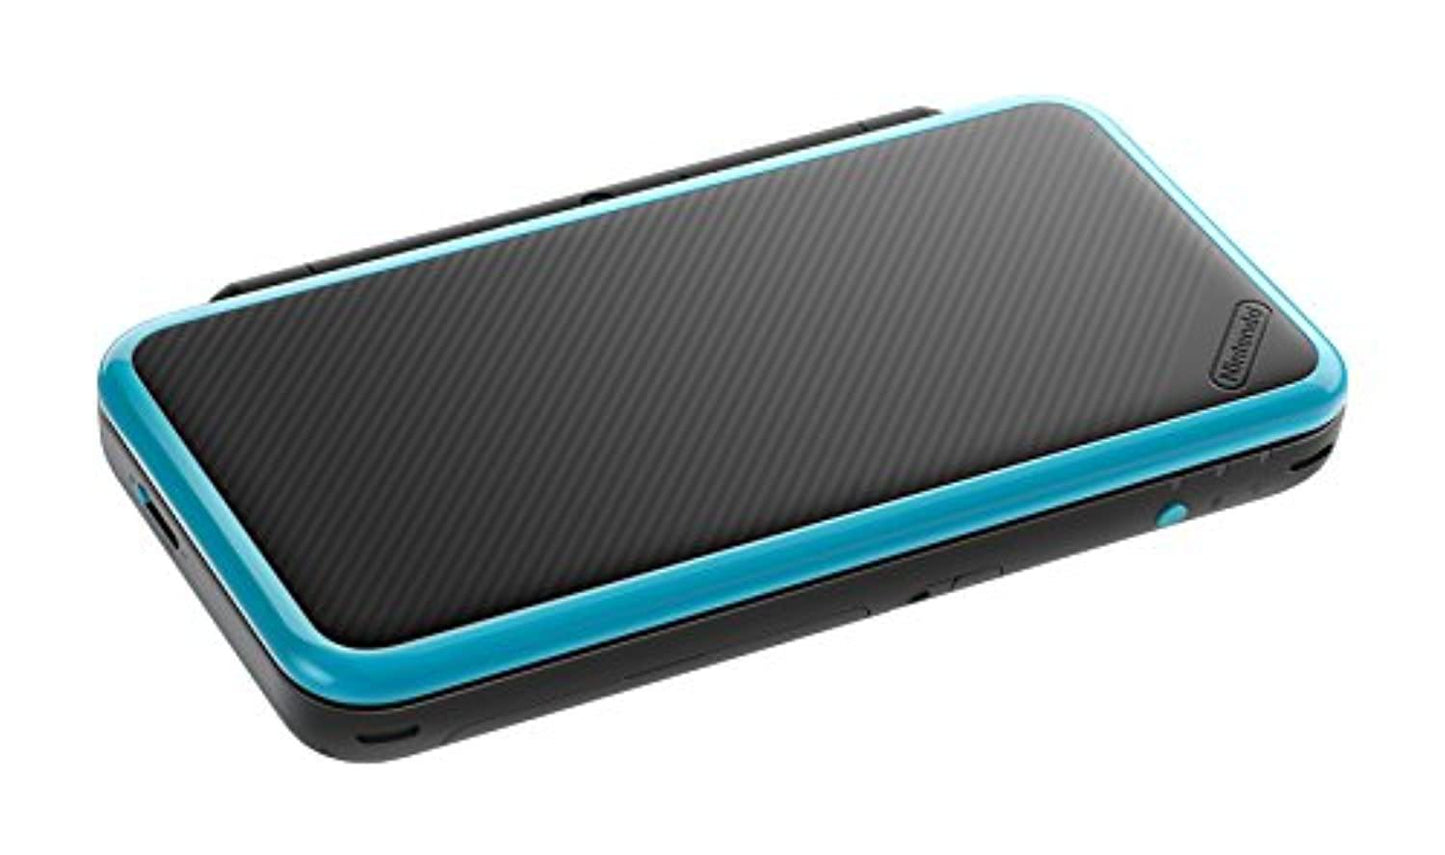 New Nintendo 2DS XL Console - Black & Turquoise (USED) - Offer Games